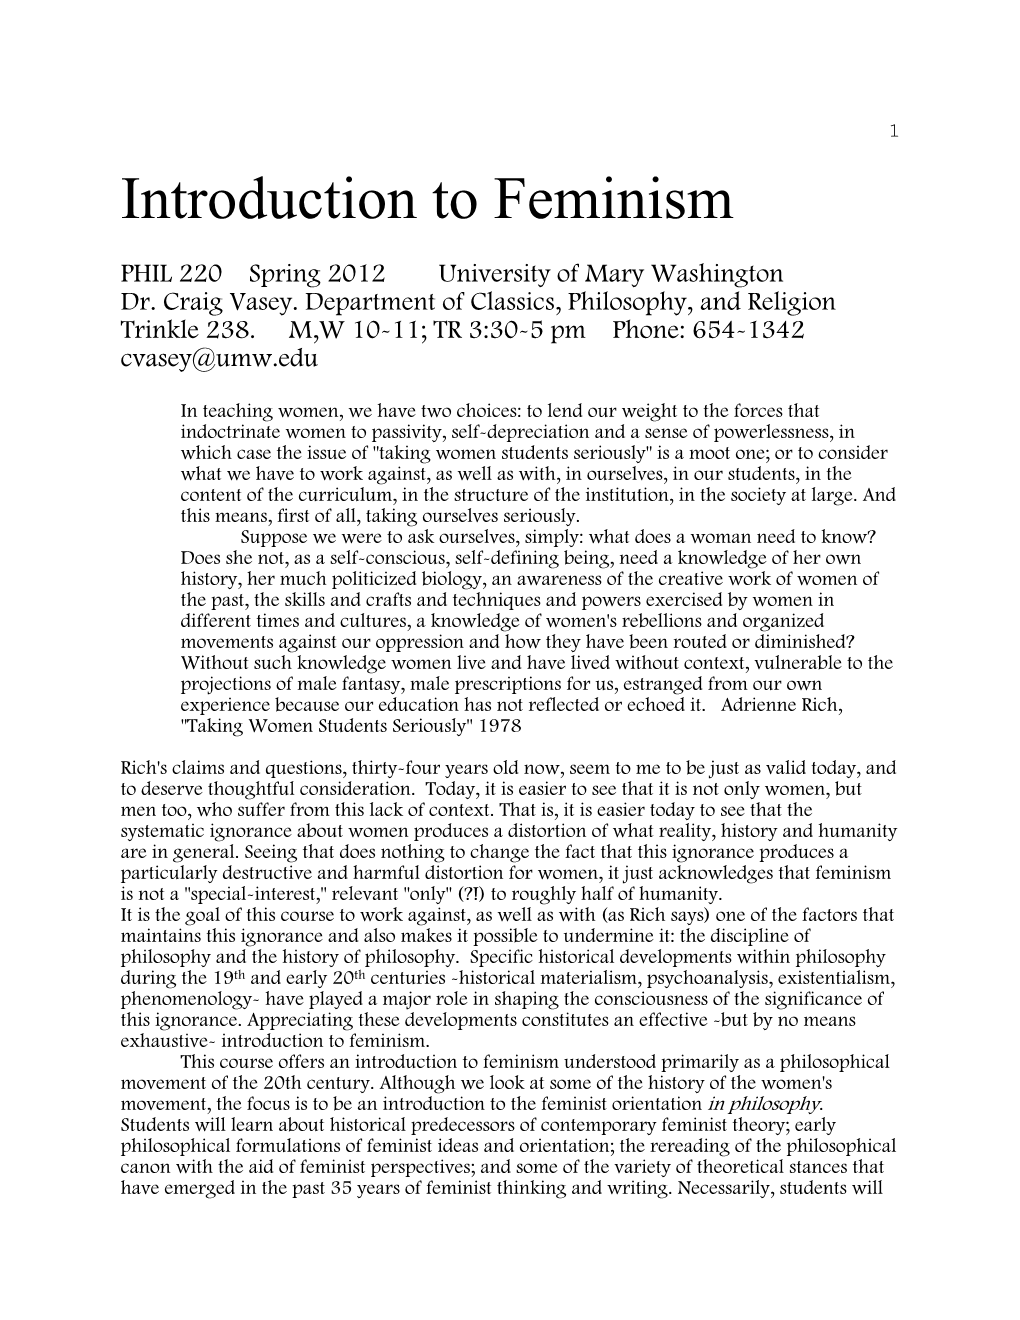 PHIL 220 Introduction to Feminism Fall 1997